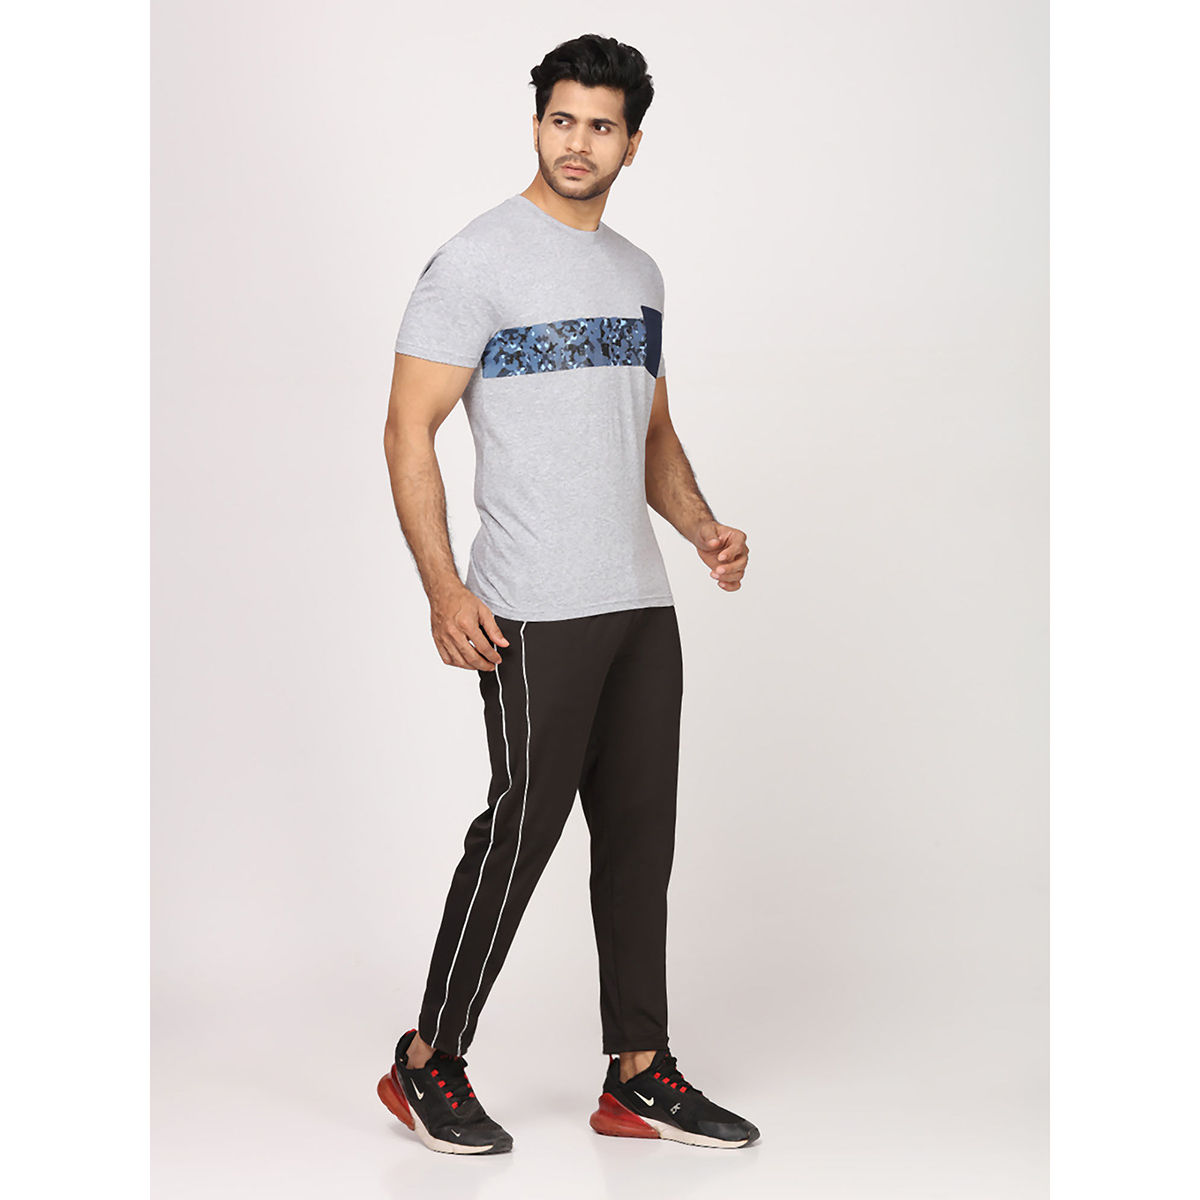 Adidas Mens Athletics Id Champ Pants L Grey in Delhi at best price by  Adidas Exclusive Store  Justdial